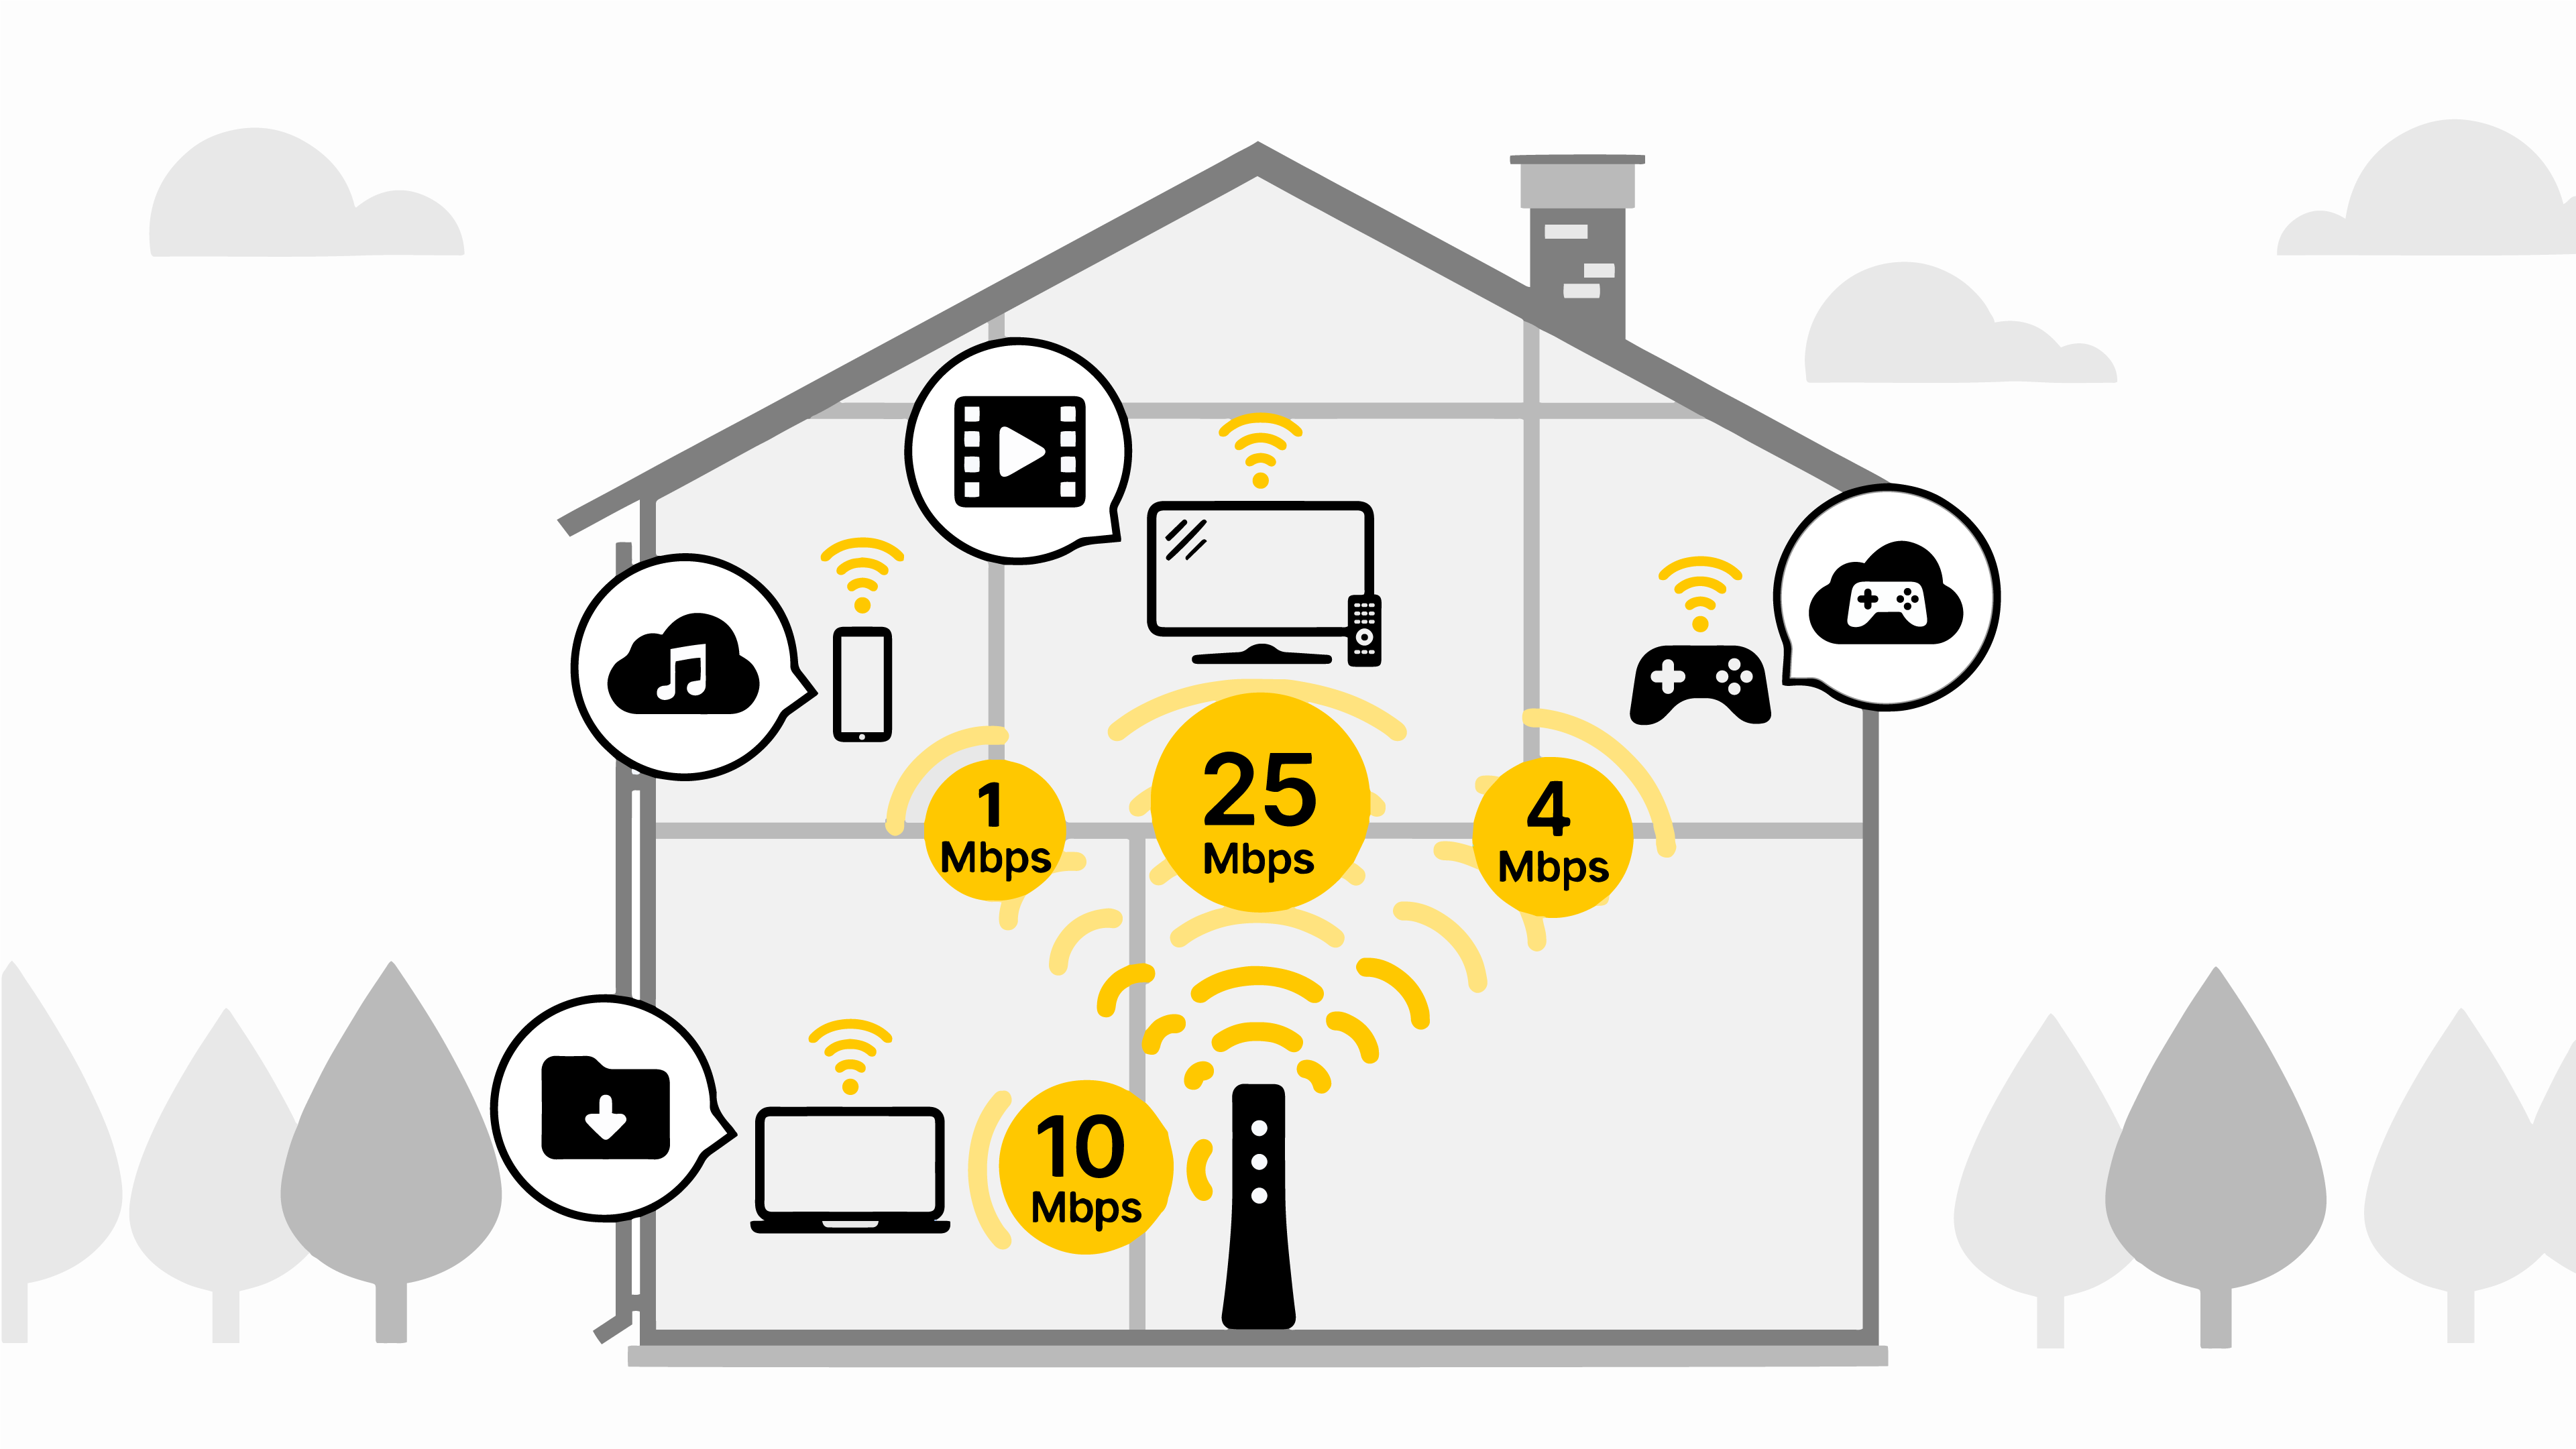 House illustration showing the different internet speeds needed for different kinds of devices